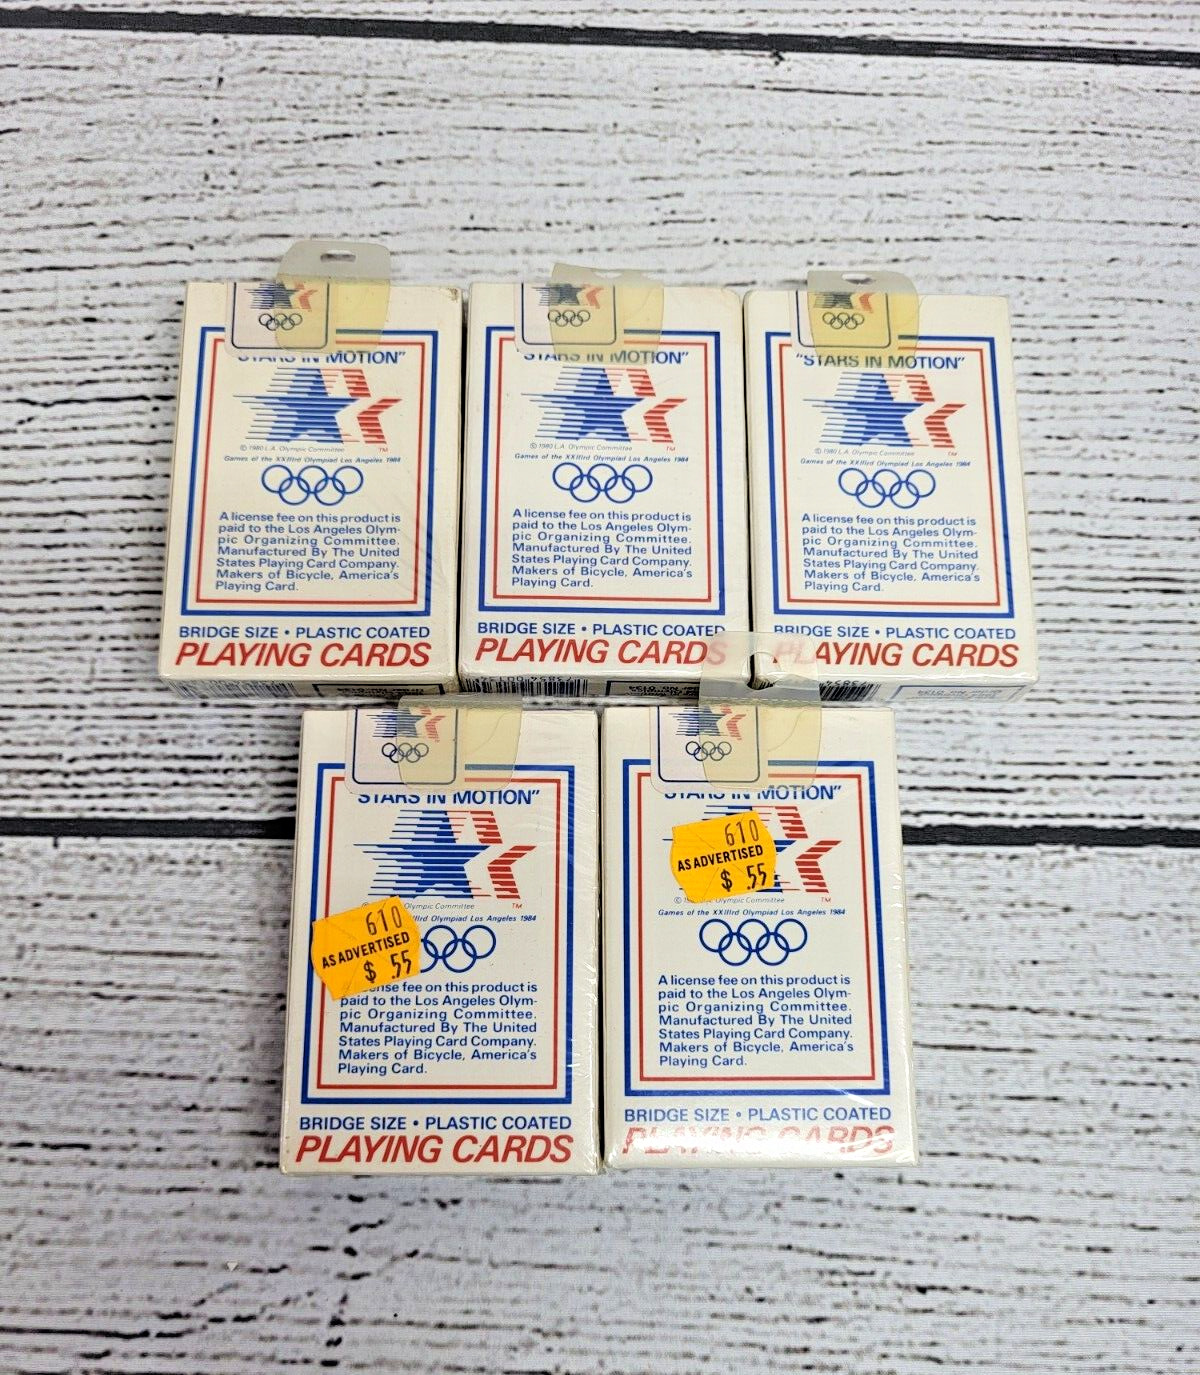 Vintage 1984 Olympic Games Bridge Size Plastic Coated Playing Cards Lot of 5 NEW